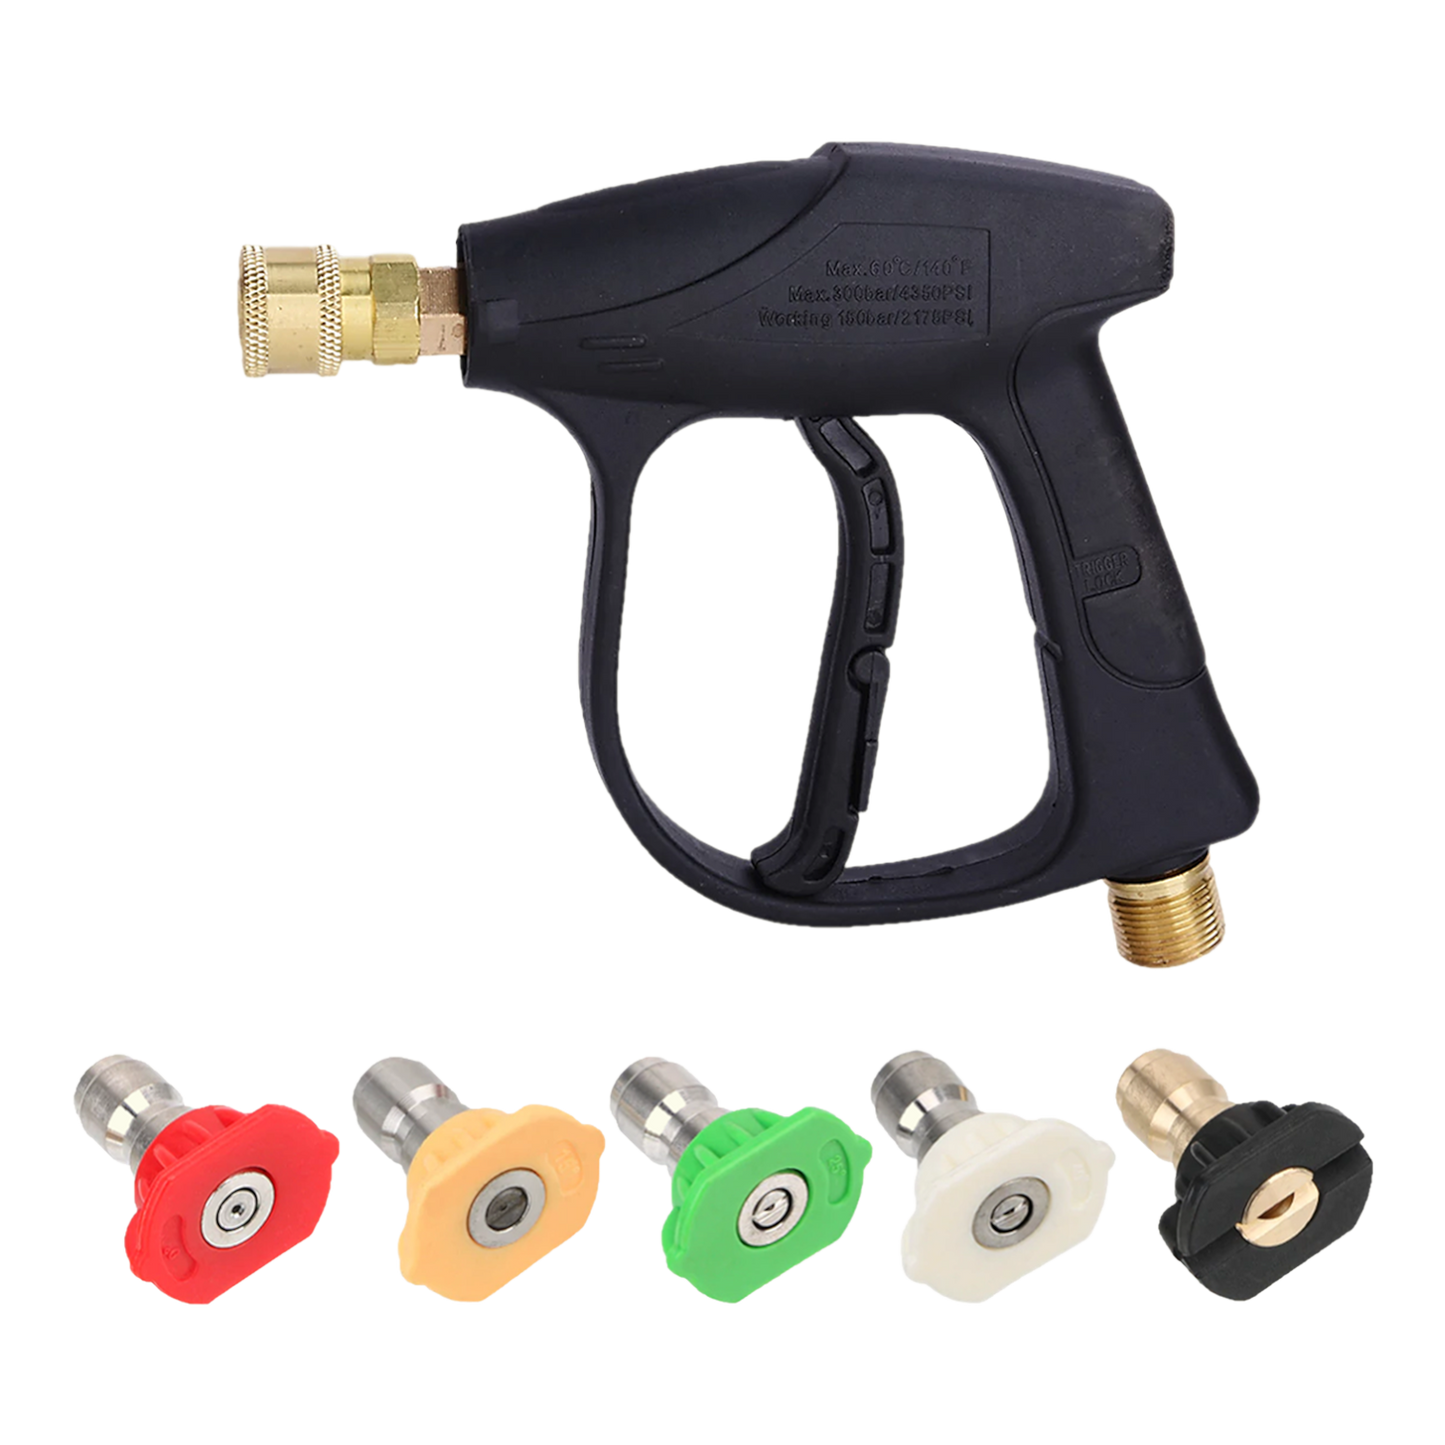 Short Trigger Gun with 5 Piece Nozzle Set, Quick Release 1/4in